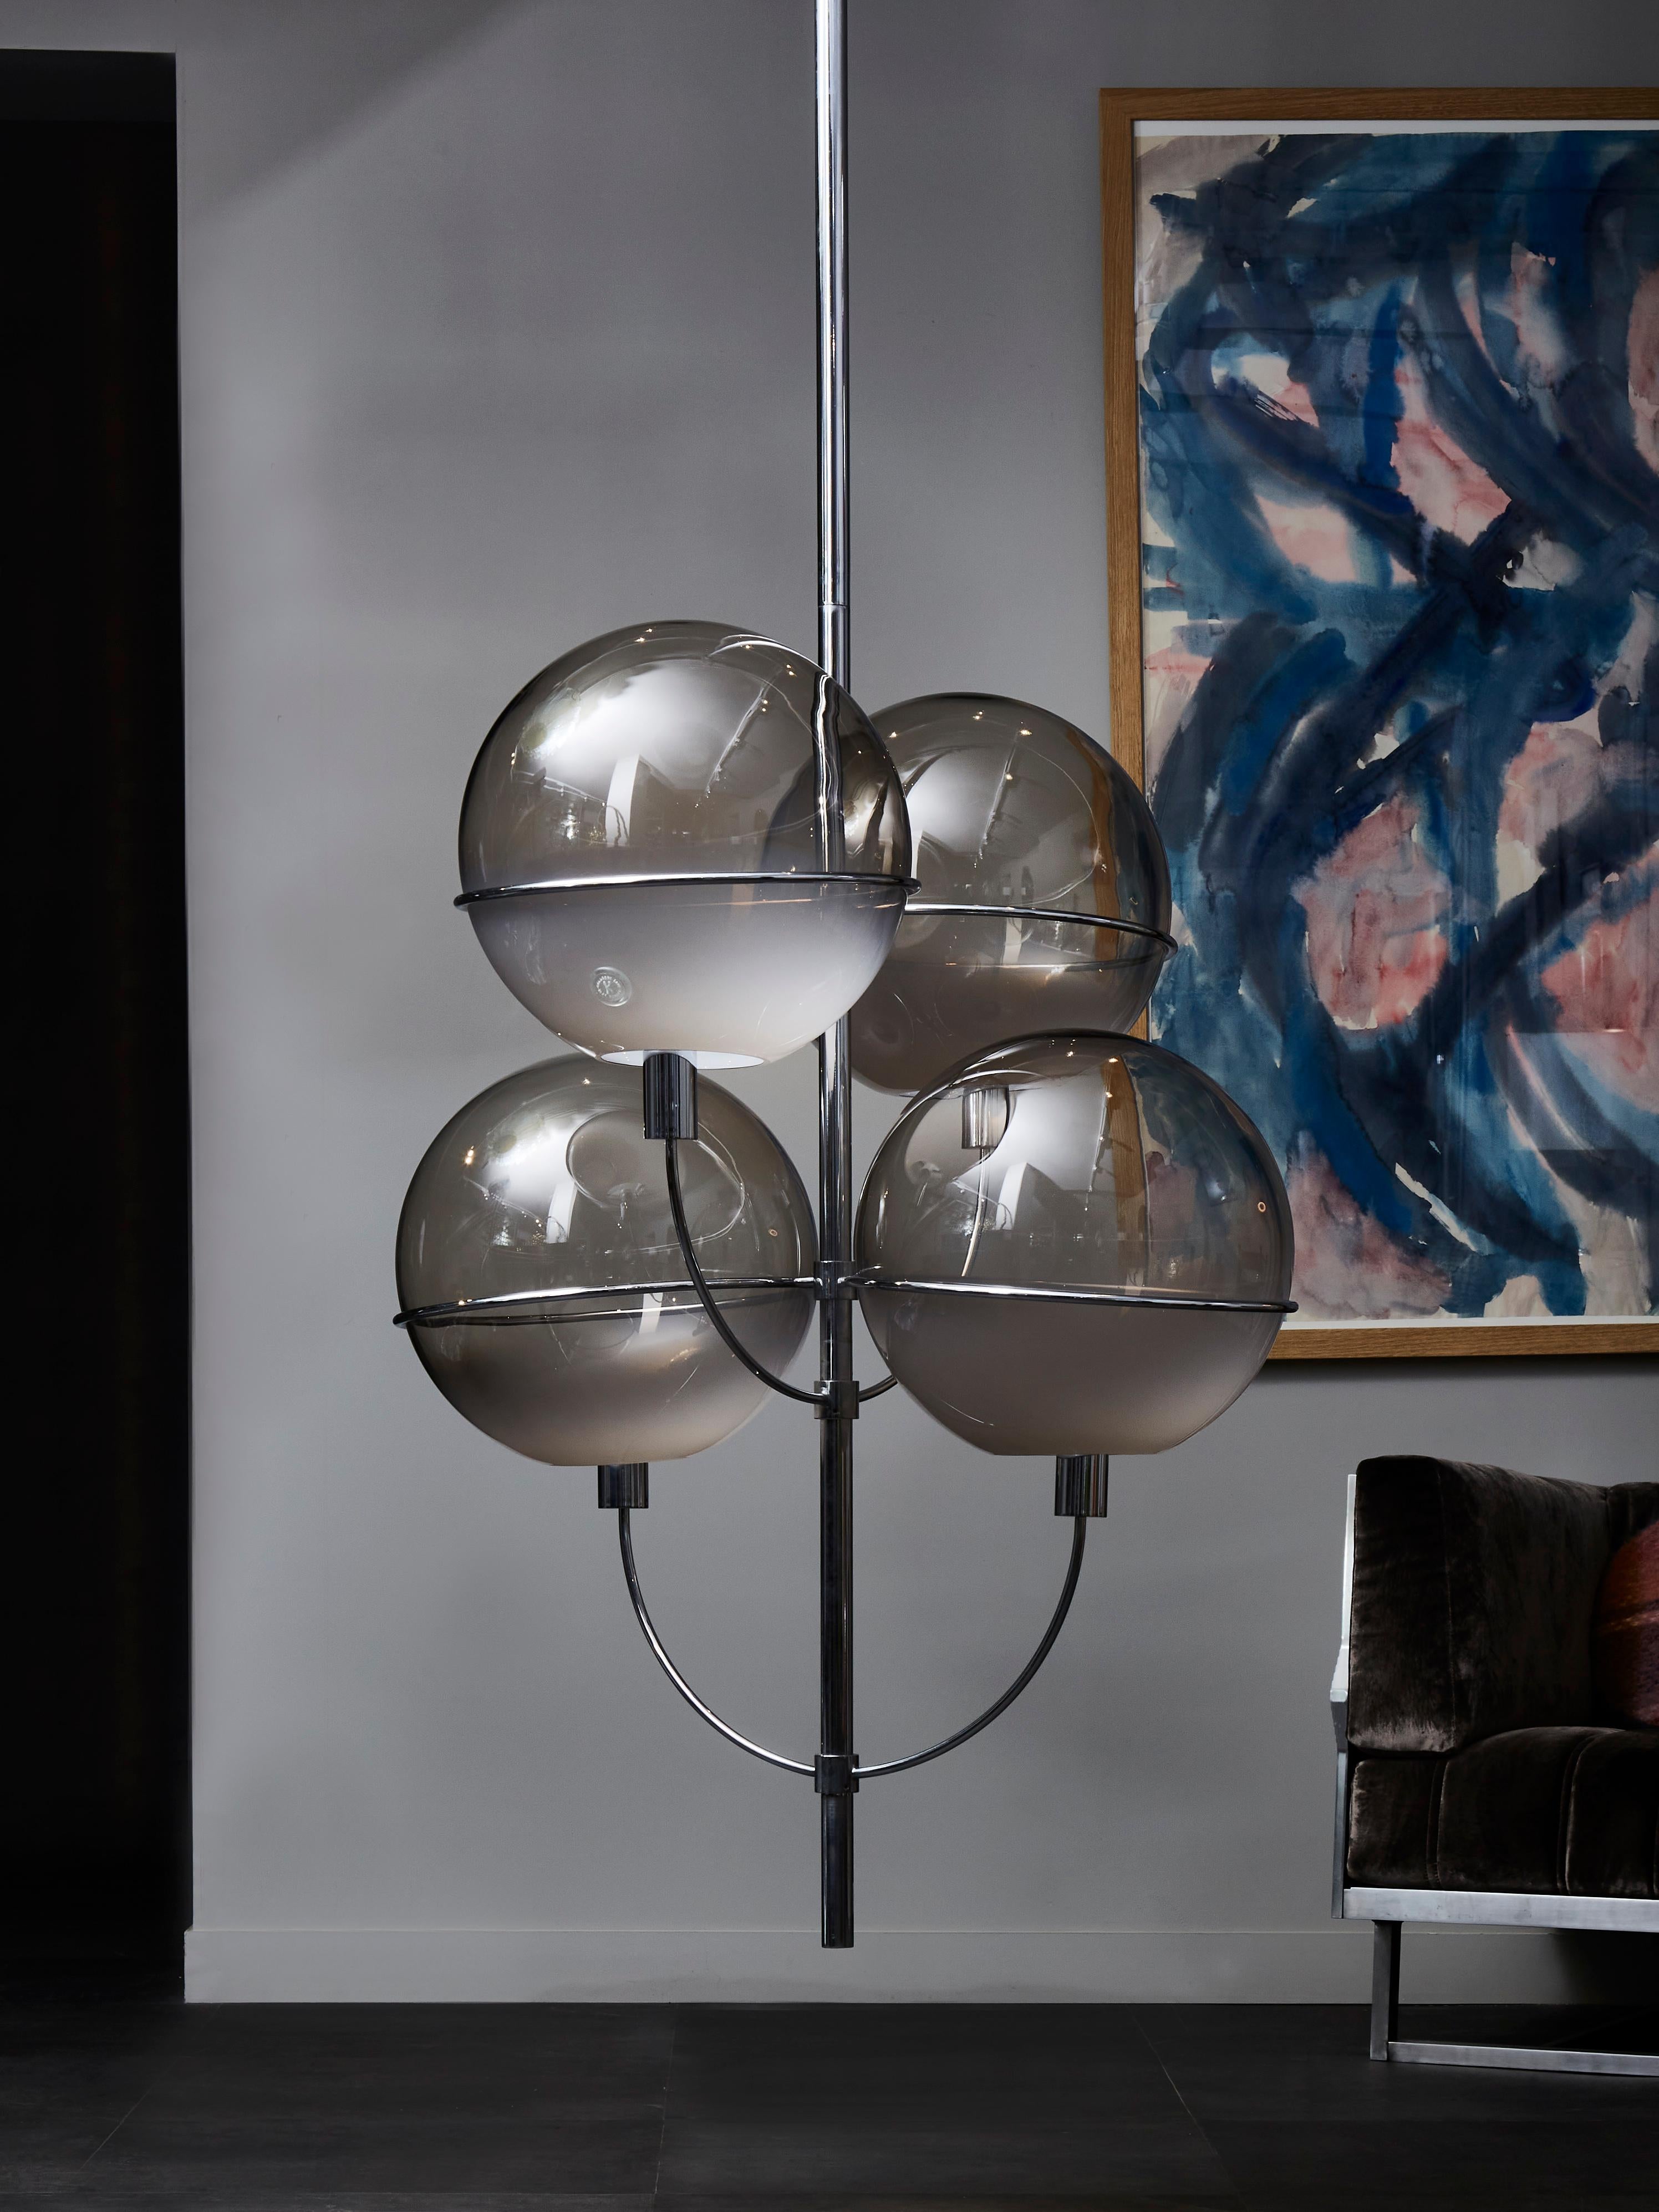 Tall Lyndon chandelier by Vico Magistretti, made of nickeled brass and smoked glass globes.